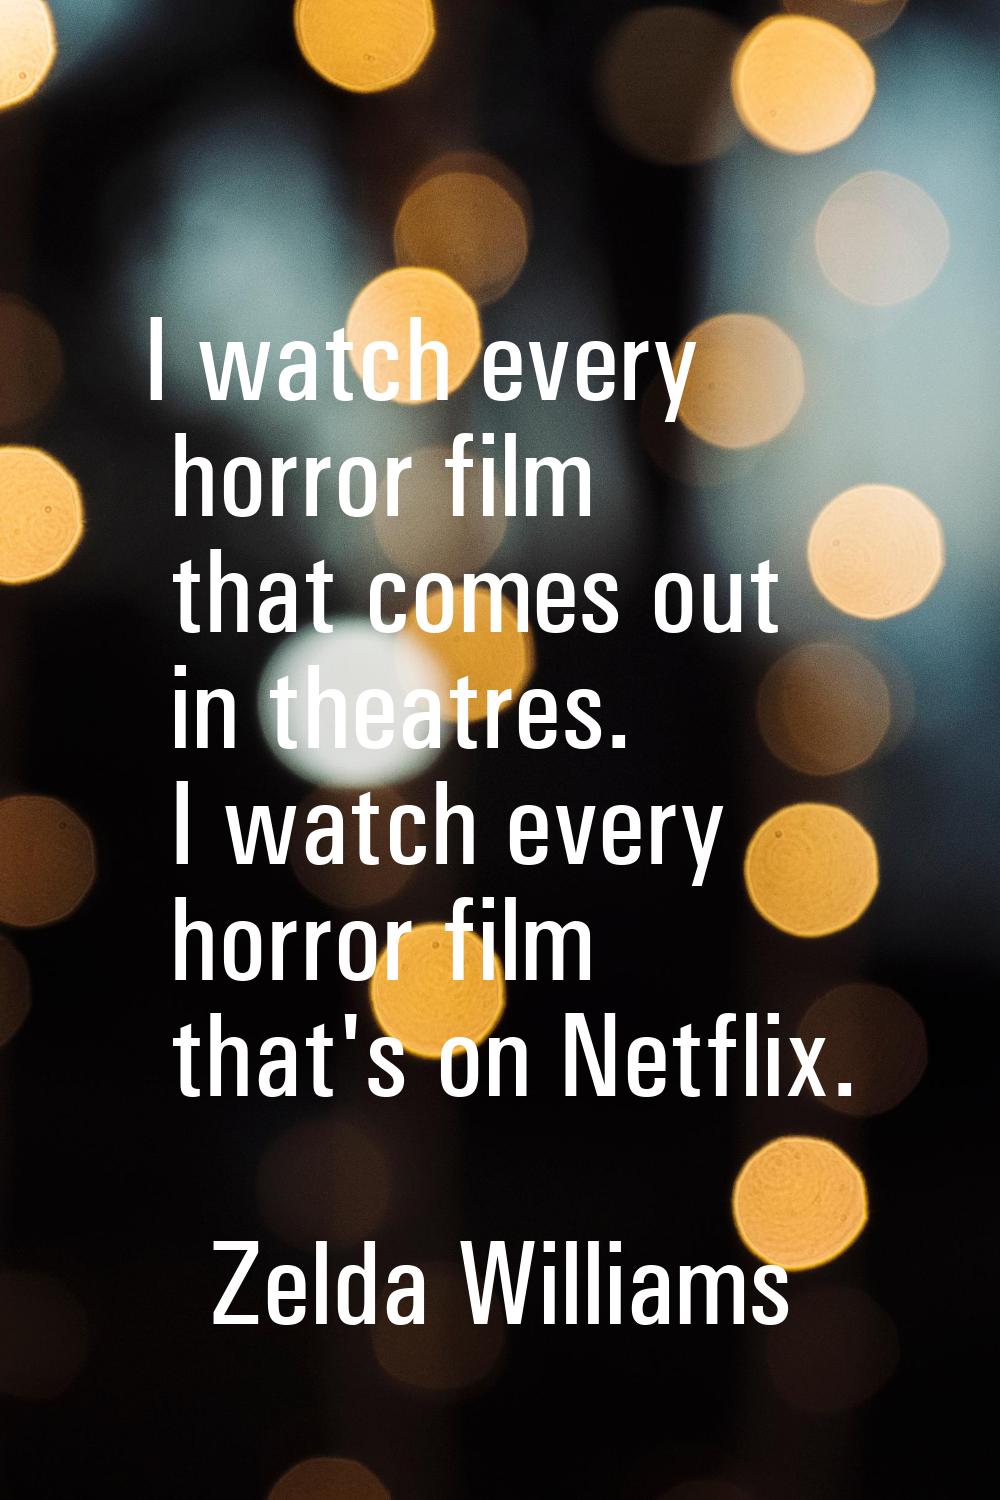 I watch every horror film that comes out in theatres. I watch every horror film that's on Netflix.